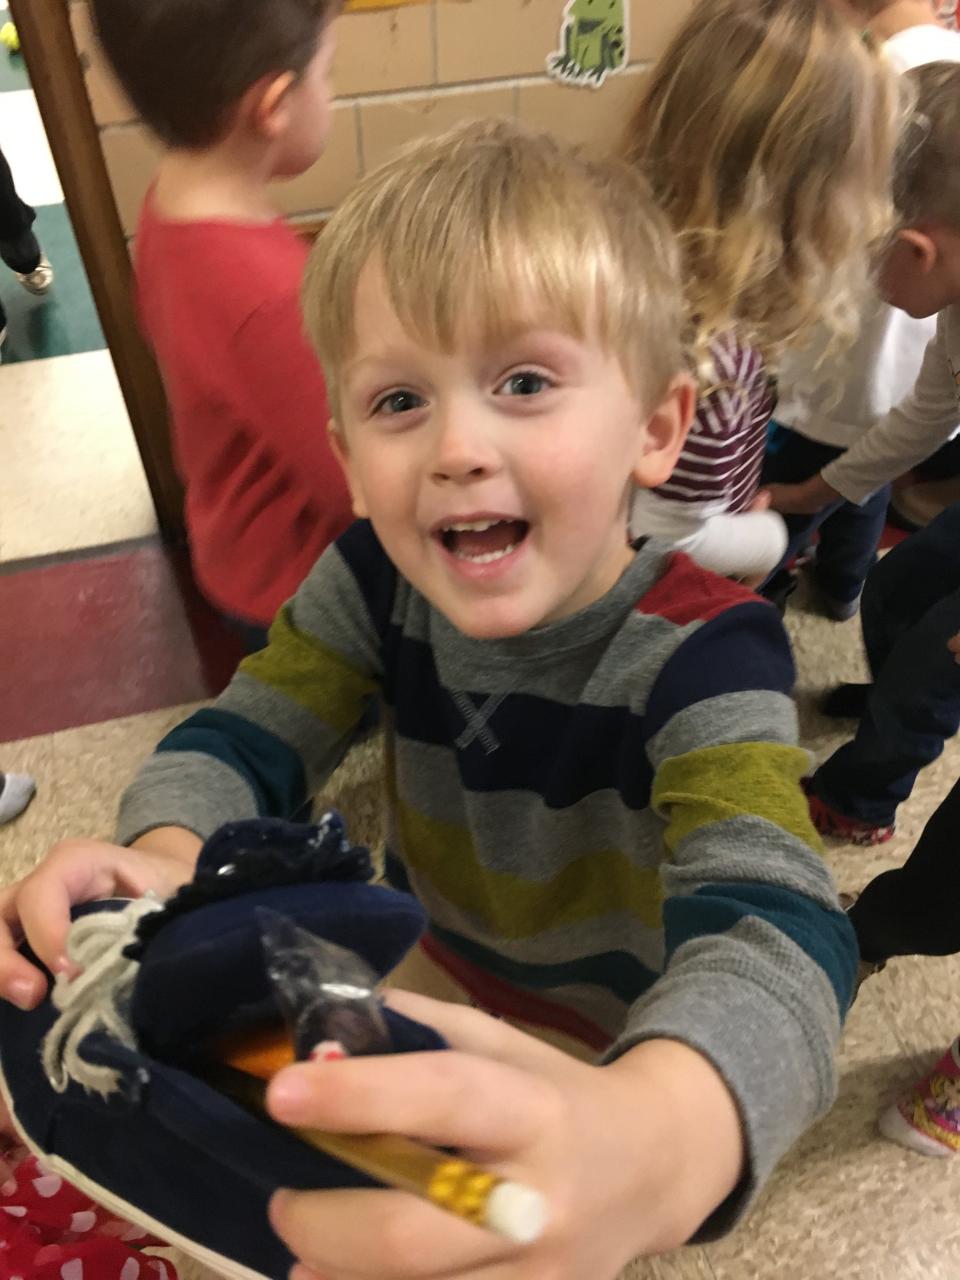 James Phillippe shows off the treats left in his shoe by St. Nicholas after he visited Immaculate Conception School in Freemont, Ohio.